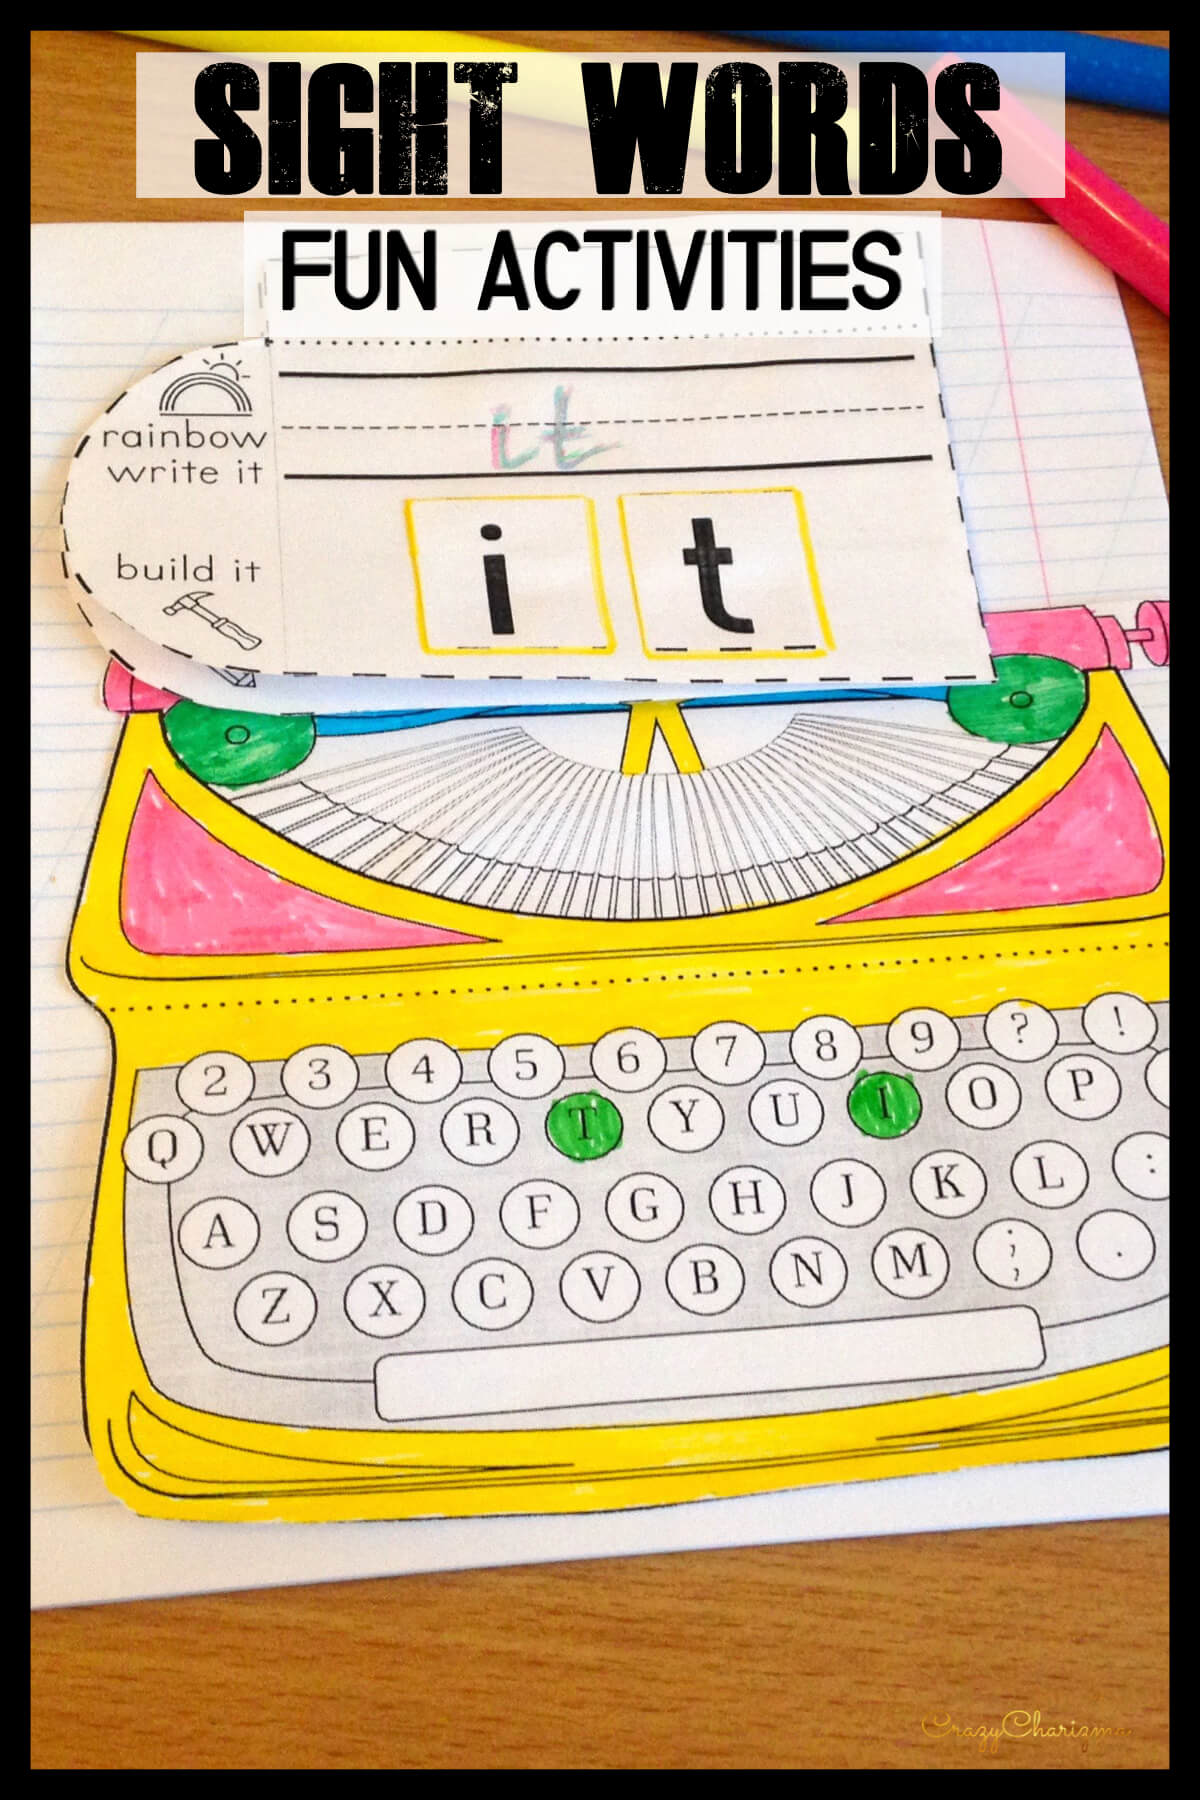 Get these Grade 3 sight words activities to practice high frequency words. Use as interactive notebooks (choose as many types of activities as you need) and/or no-prep worksheets (just print and go).